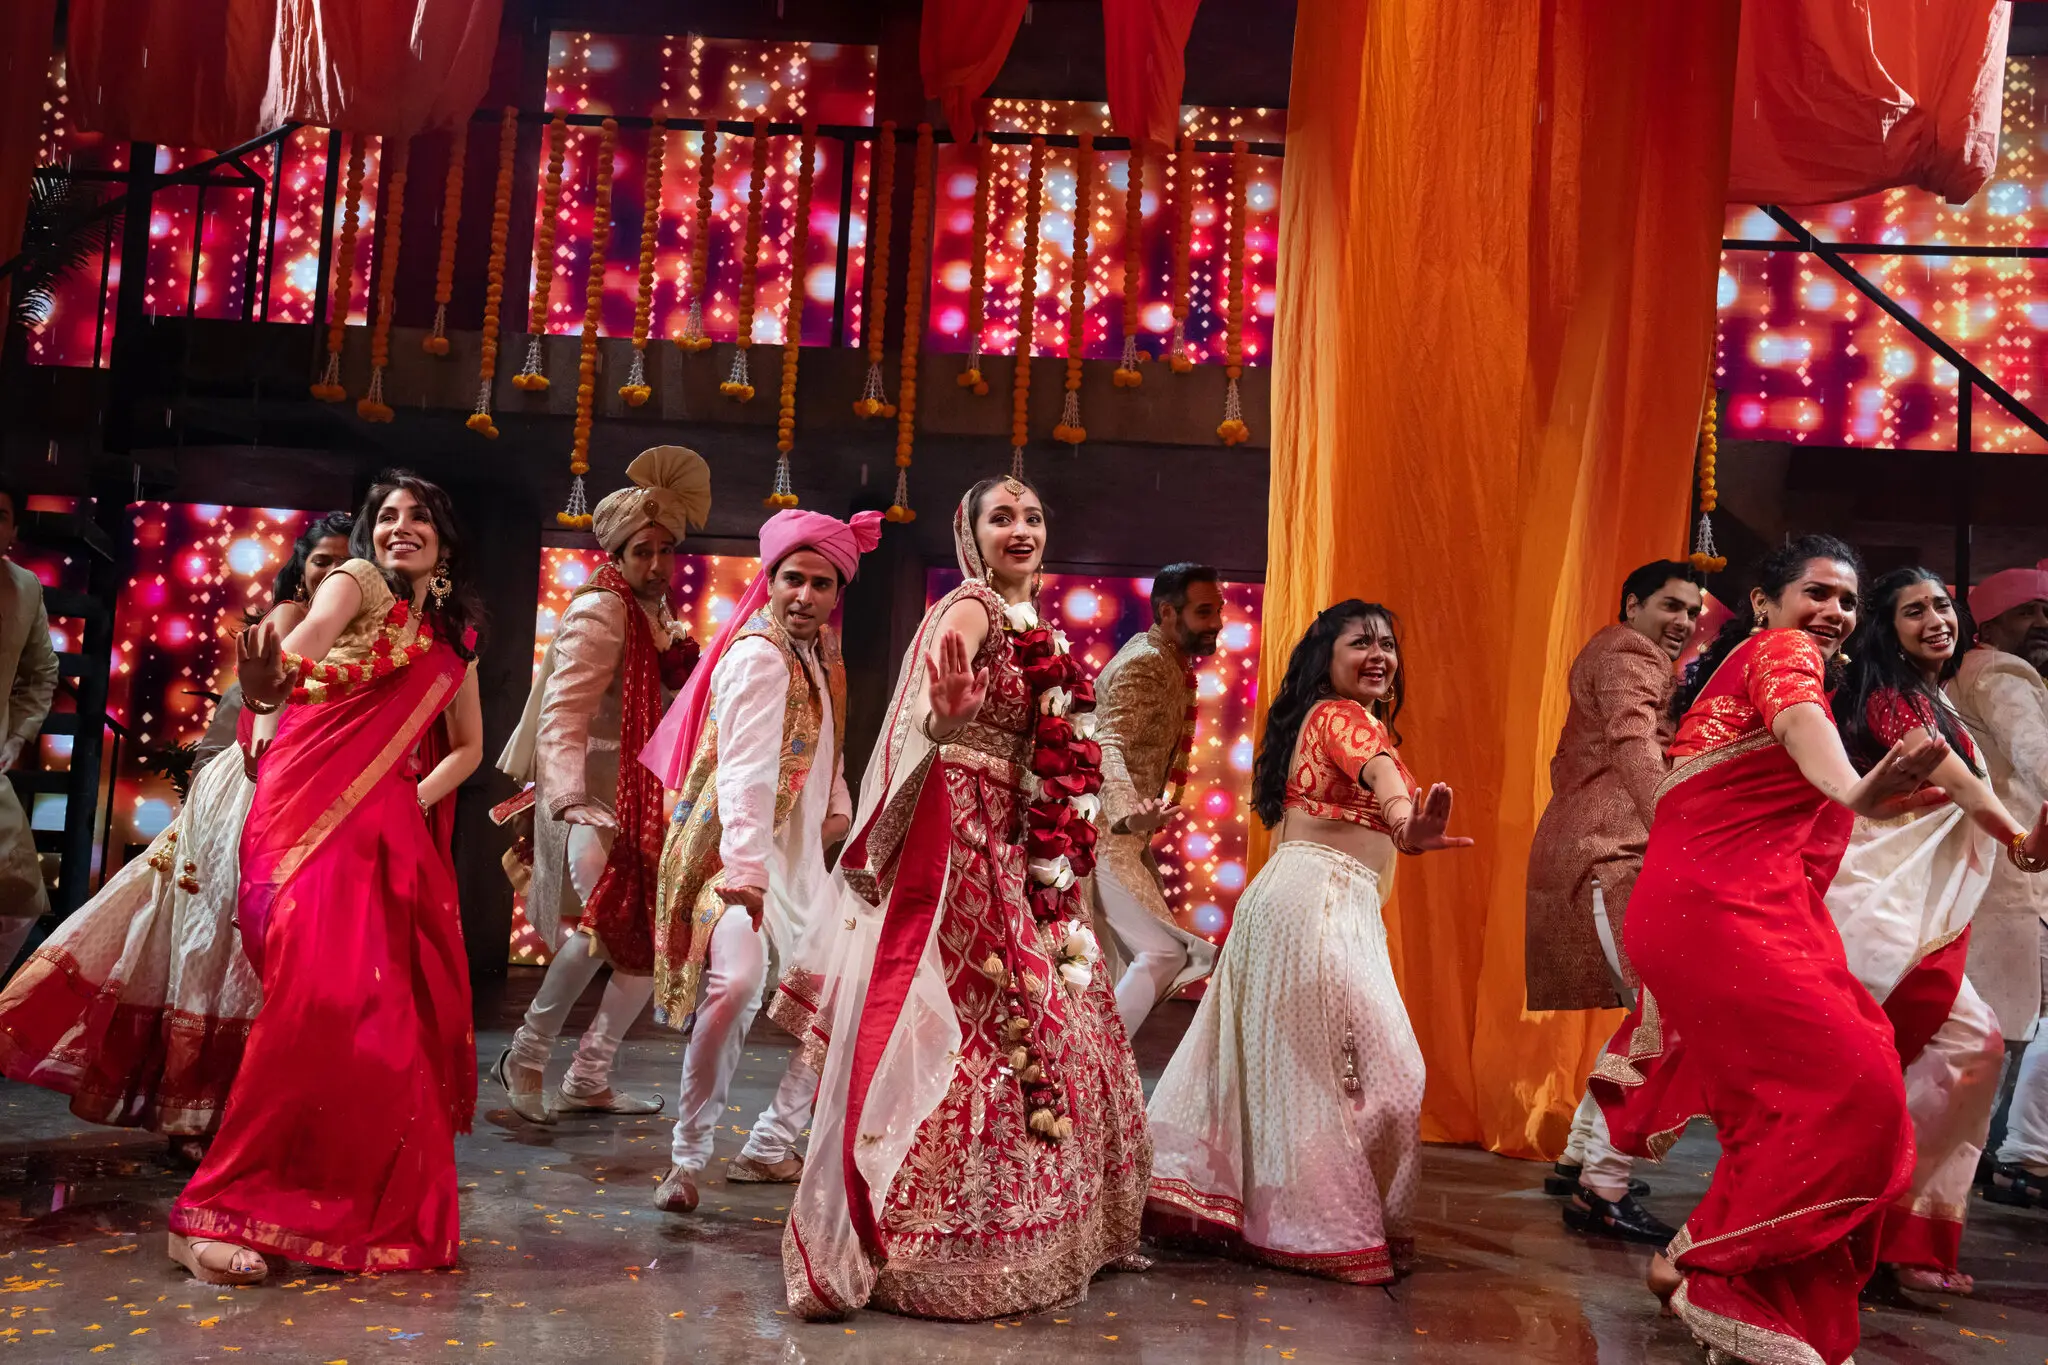 Monsoon Wedding the Musical – a hit or miss for this generation?